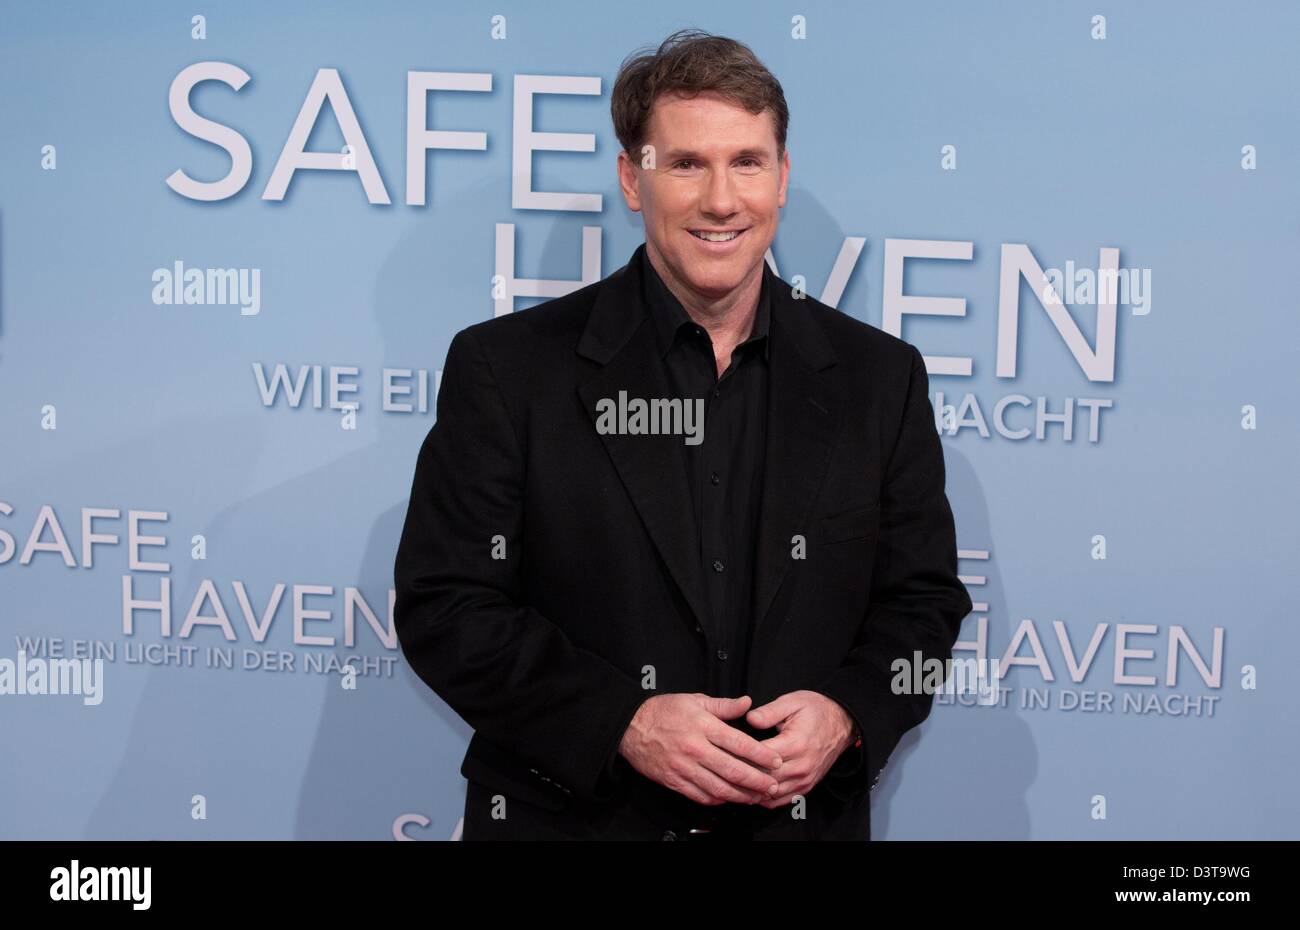 Berlin, Germany, 24th Feb, 2013. US author and screenplay writer Nicholas Sparks arrives for the premiere of his new film 'Safe Haven' at the Cinemaxx movie theatre in Berlin, Germany, 24 February 2013. The film will start in cinemas across Germany on 7 March 2013. Photo: Joerg Carstensen/dpa/Alamy Live News Stock Photo